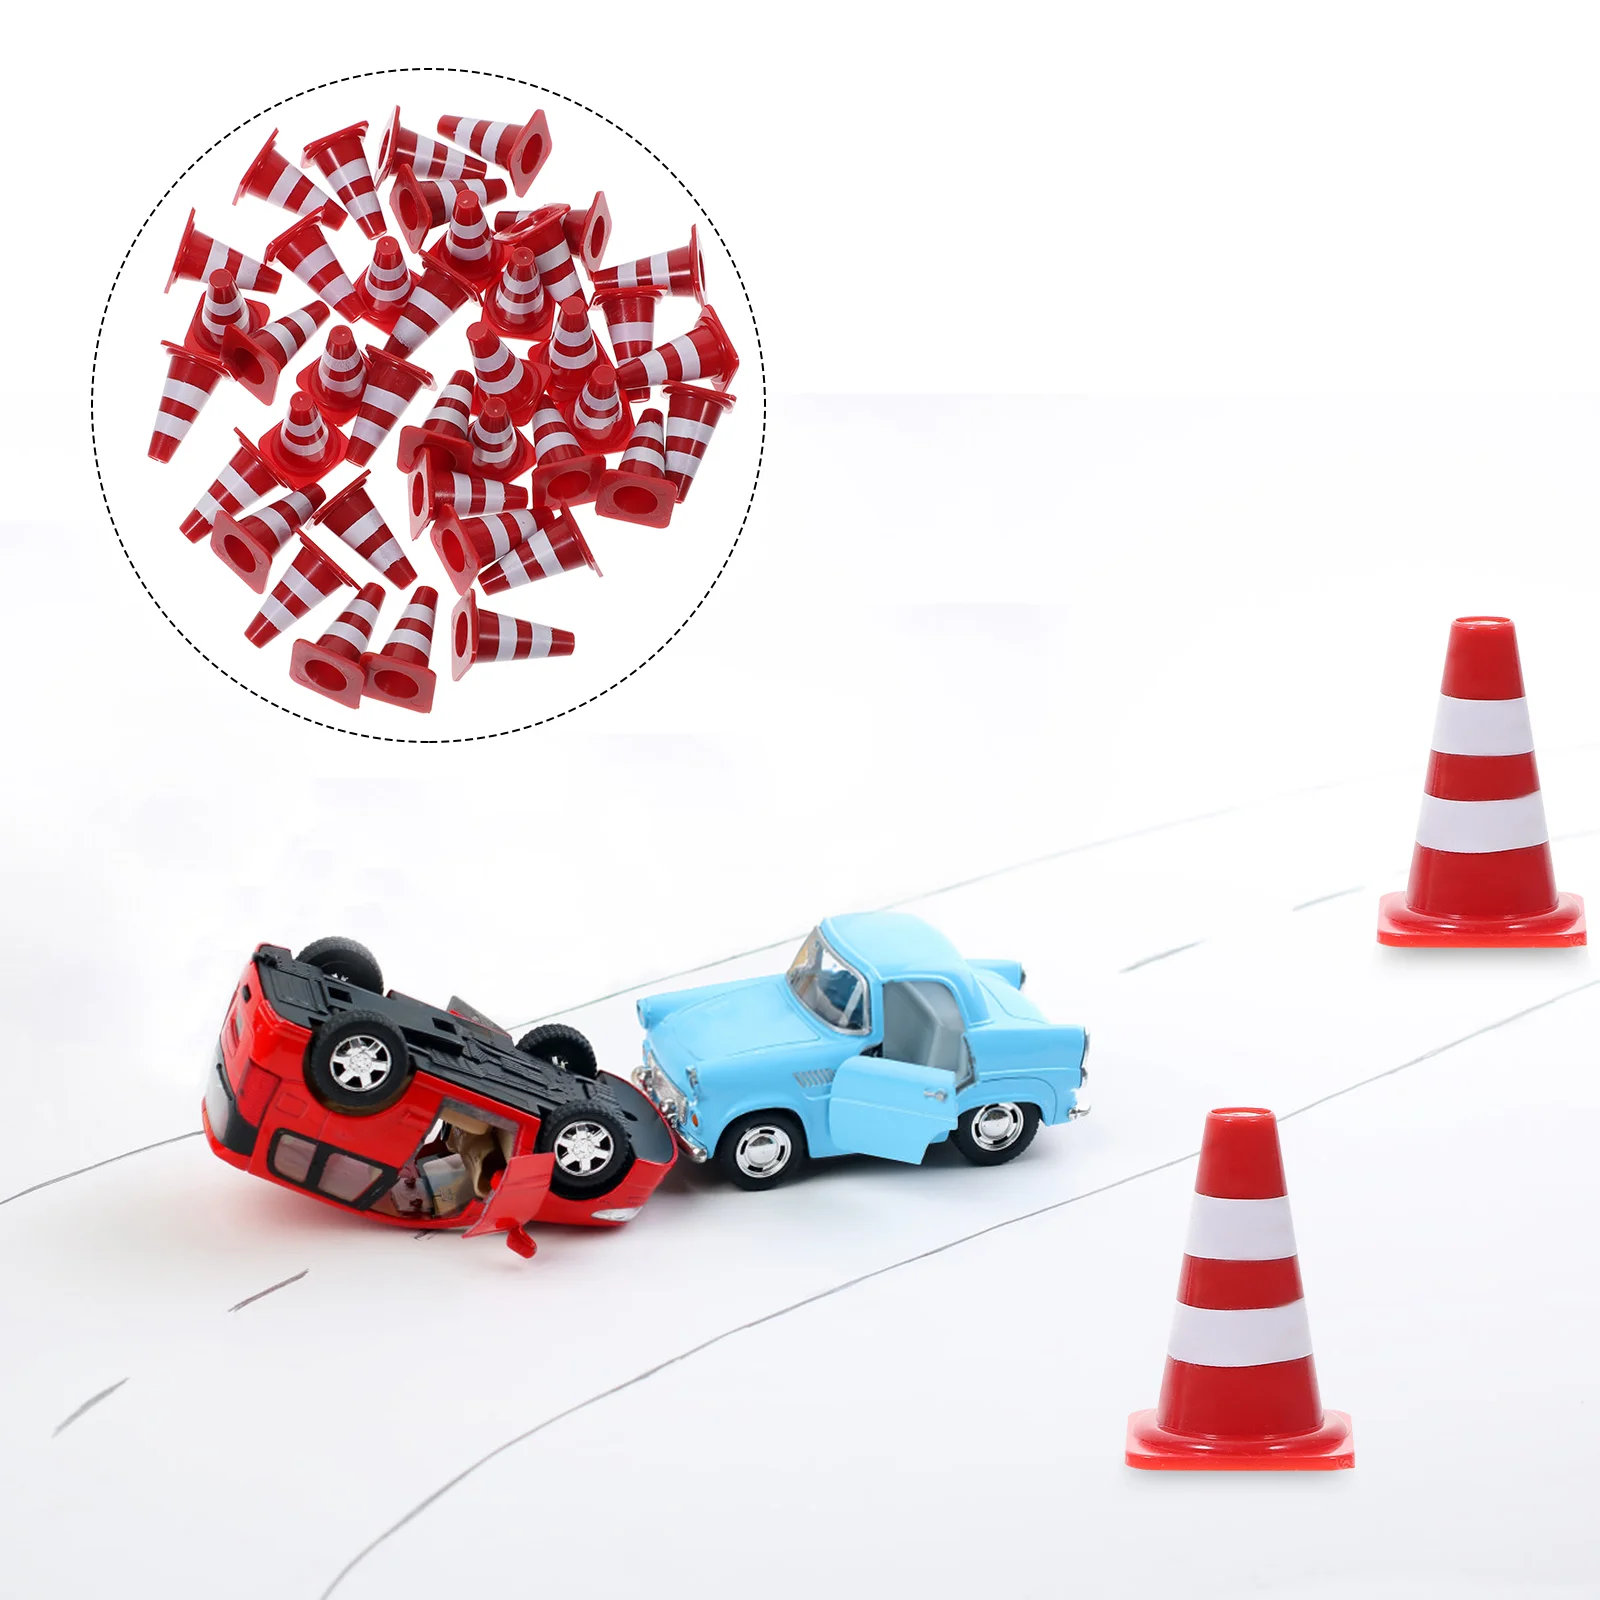 

Roadblock Simulation Props Barricade Toy Traffic Sign Toys Mini Model Scene Plaything Plastic Cognitive Micro